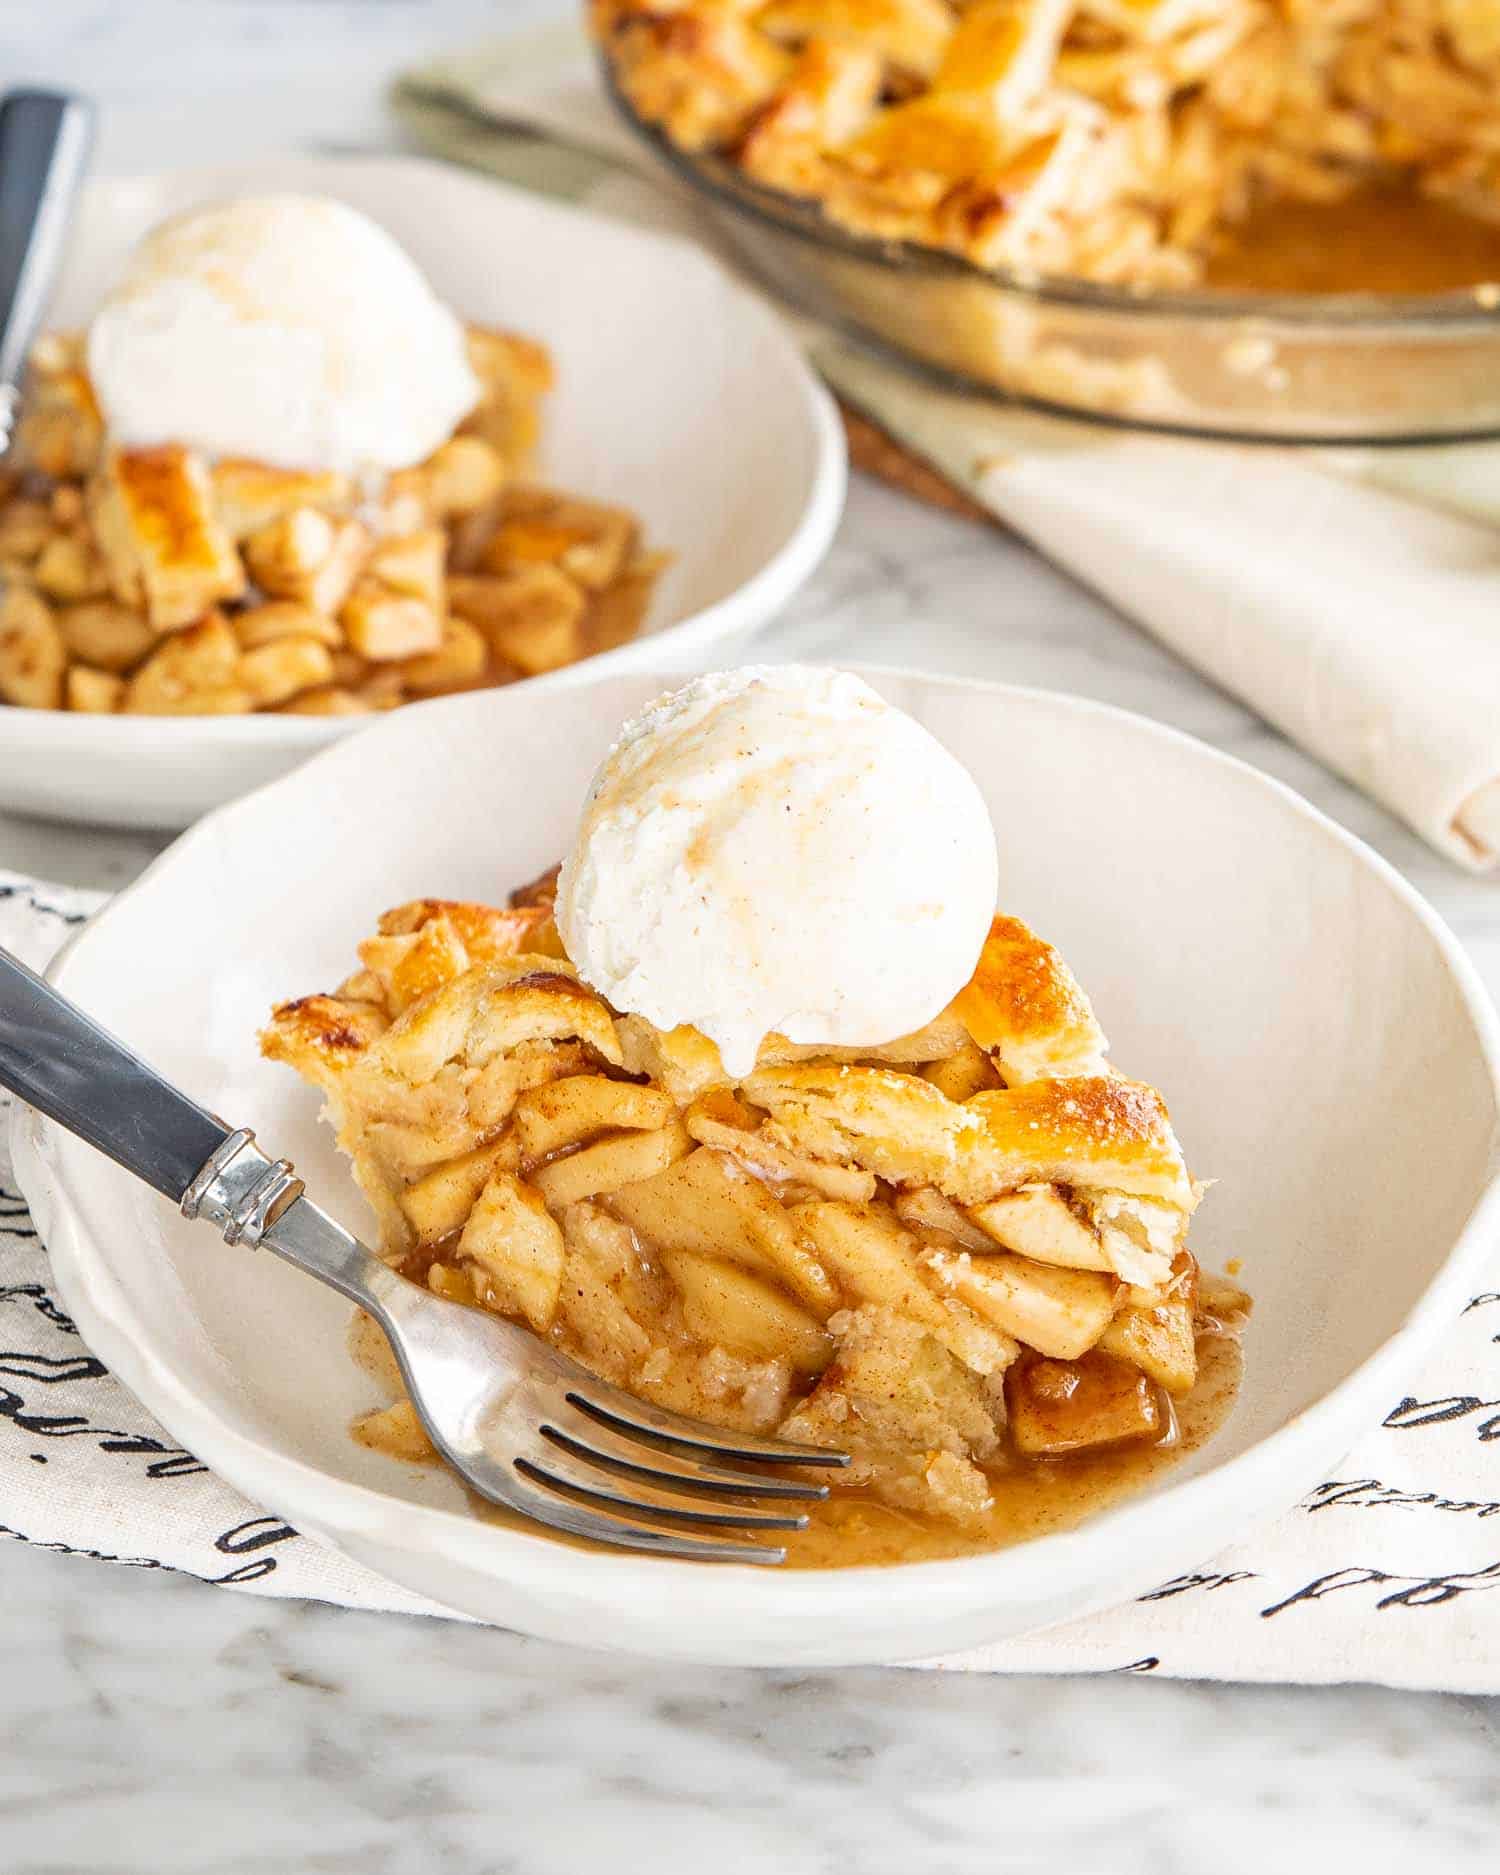 a slice of apple pie with a scoop of ice cream in a bowl.